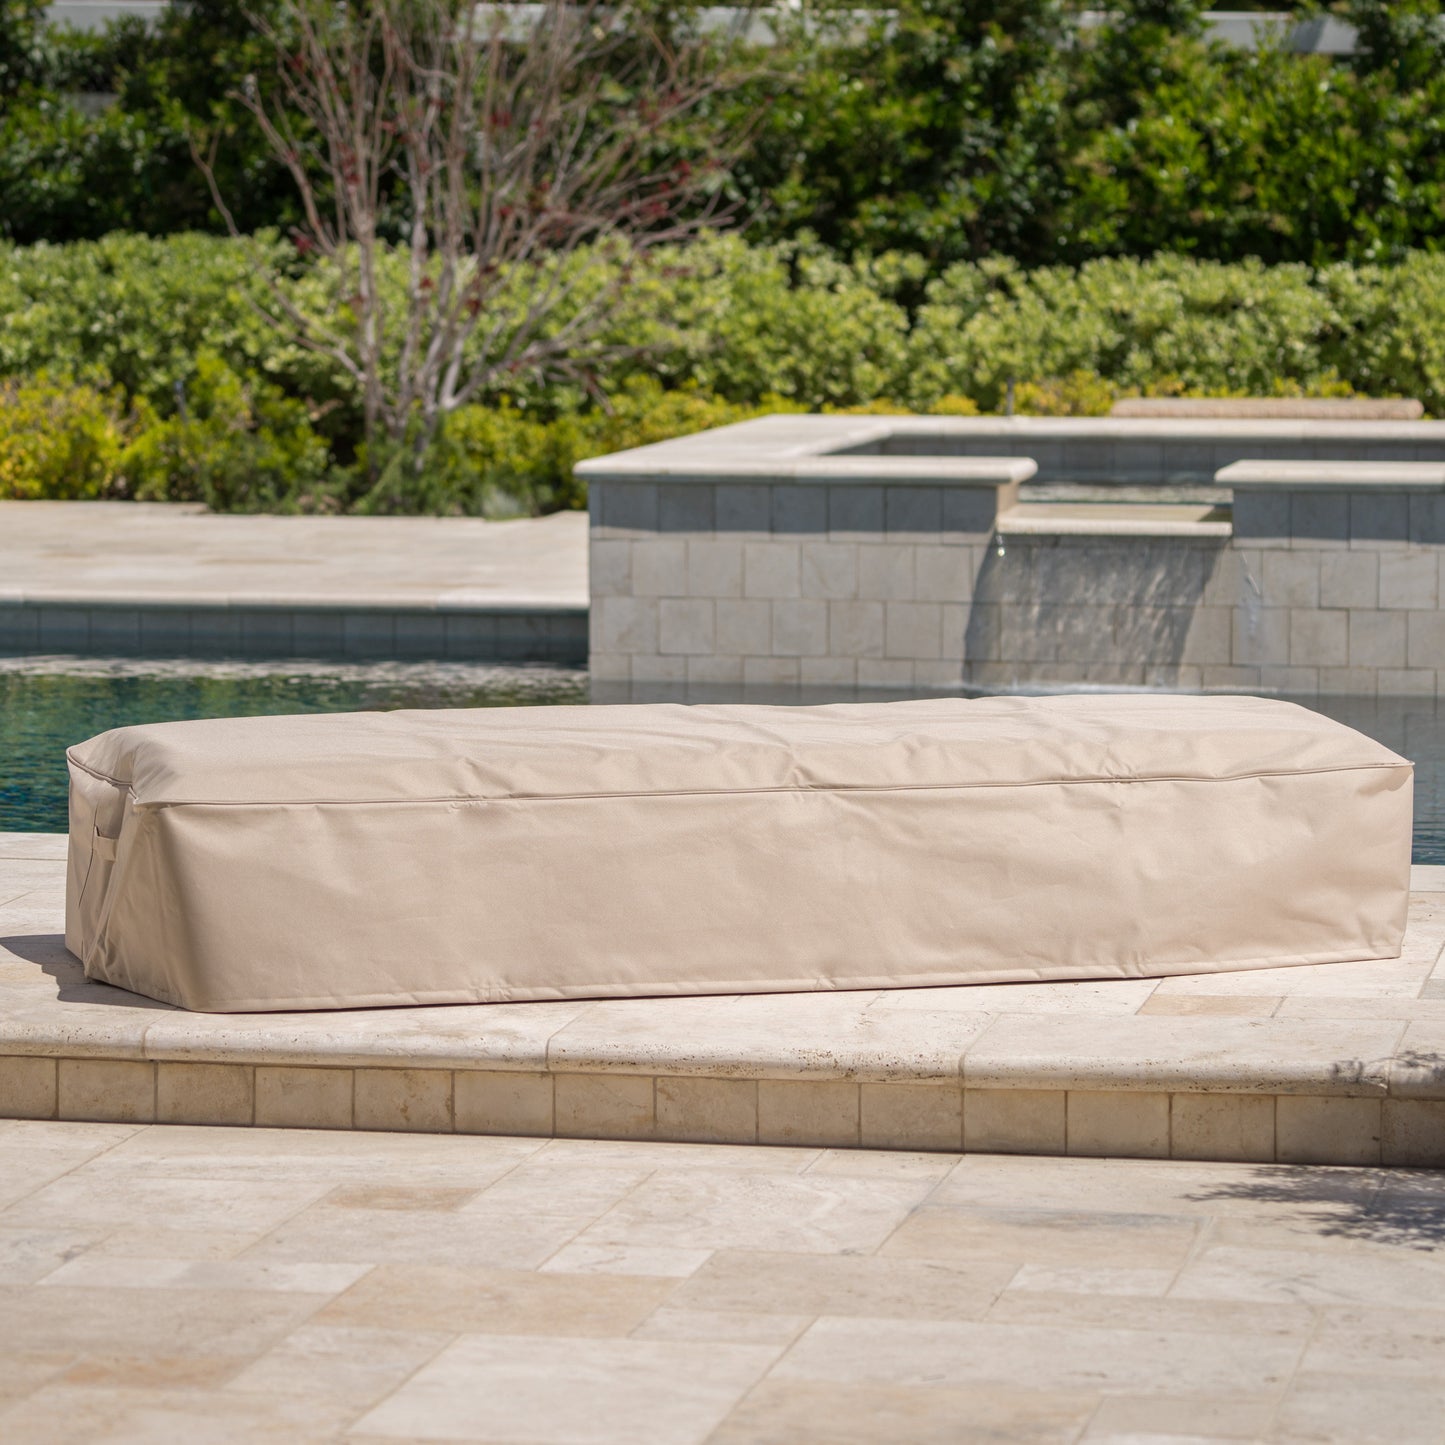 Savana Outdoor Patio Wicker Lounge with Cover